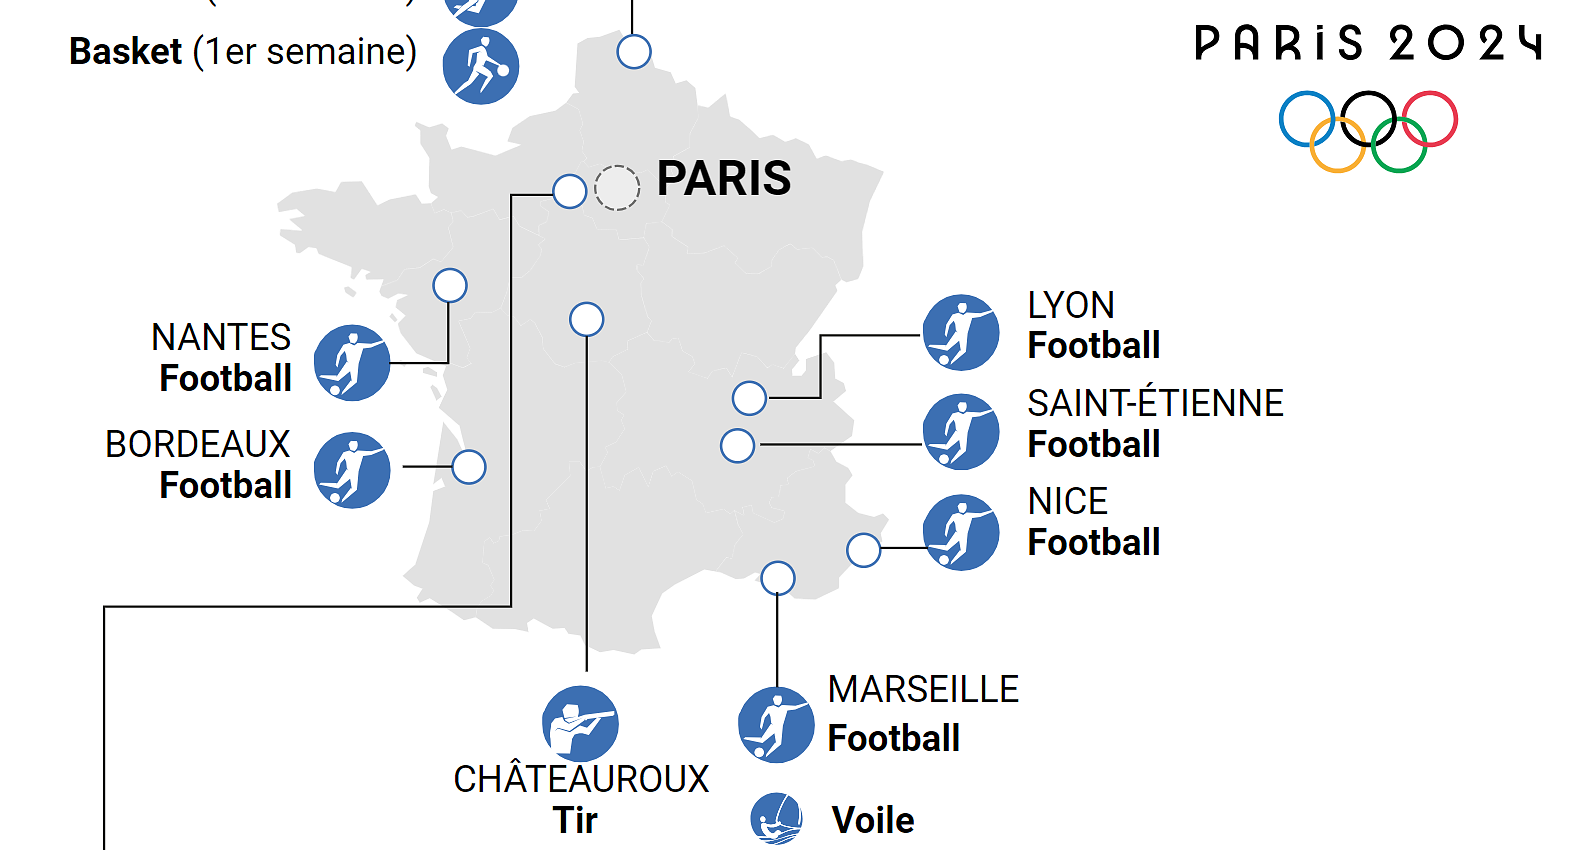 Paris 2024: the map of the Olympic Games sites